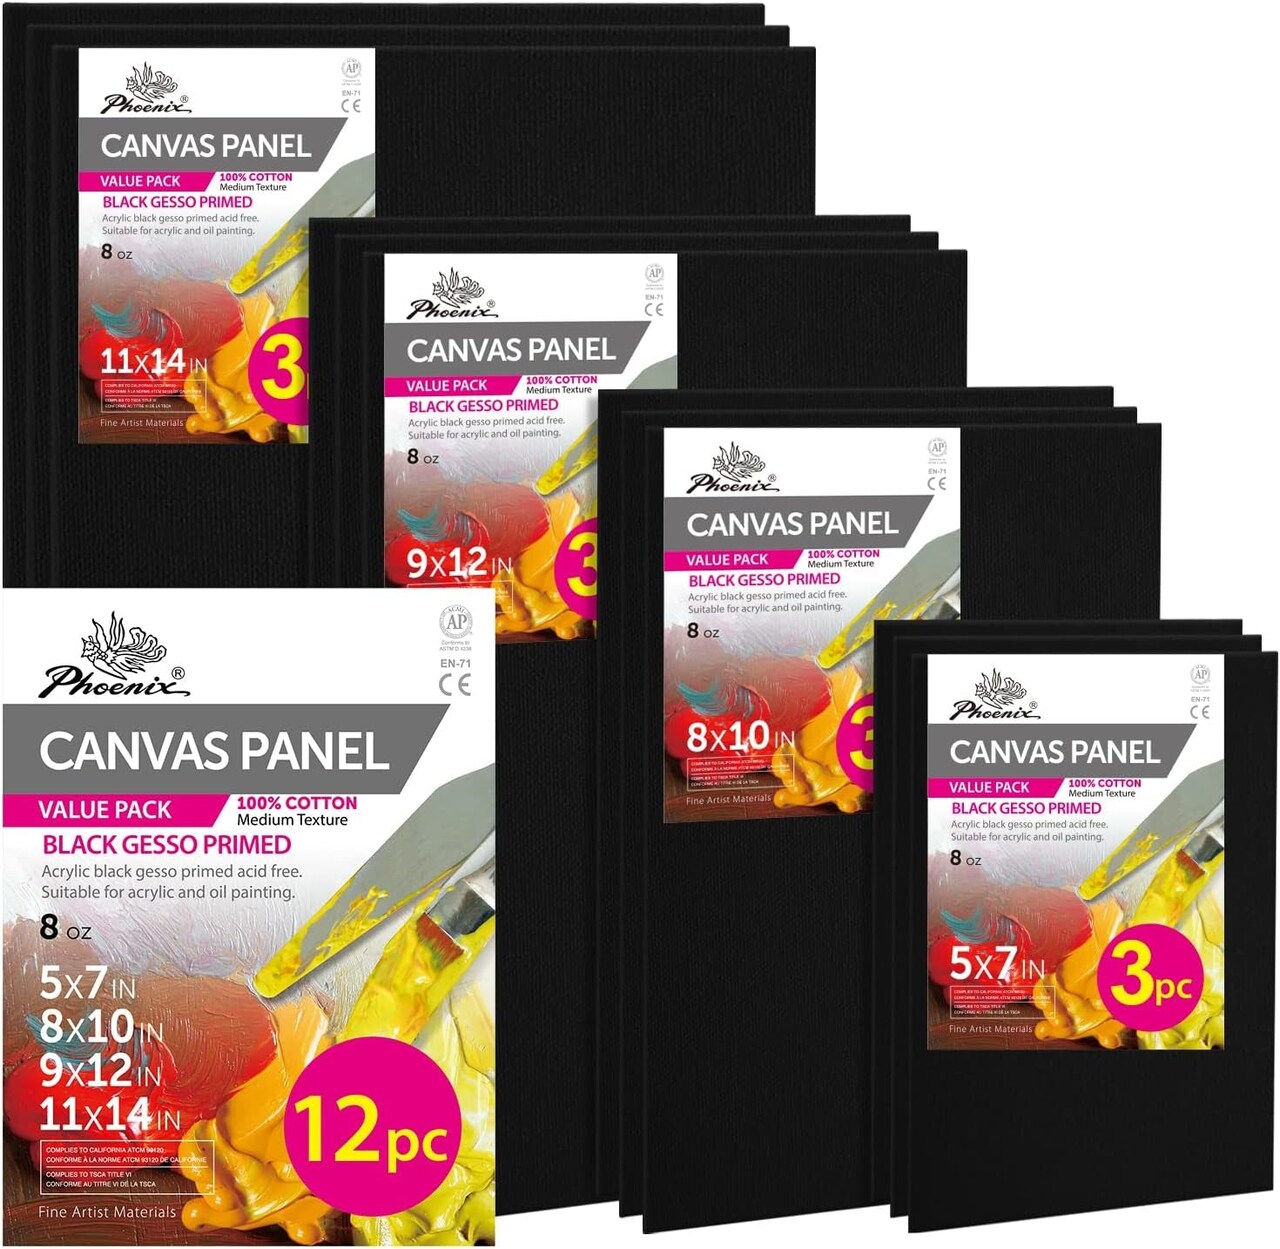 PHOENIX Black Canvas Panels 11X14 Inch, 6 Pack - 8 Oz Triple Primed 100%  Cotton Acid Free Canvases for Painting, Blank Flat Canvas Boards for  Acrylic, Oil, Tempera, Metallic, Neon Painting & Crafts